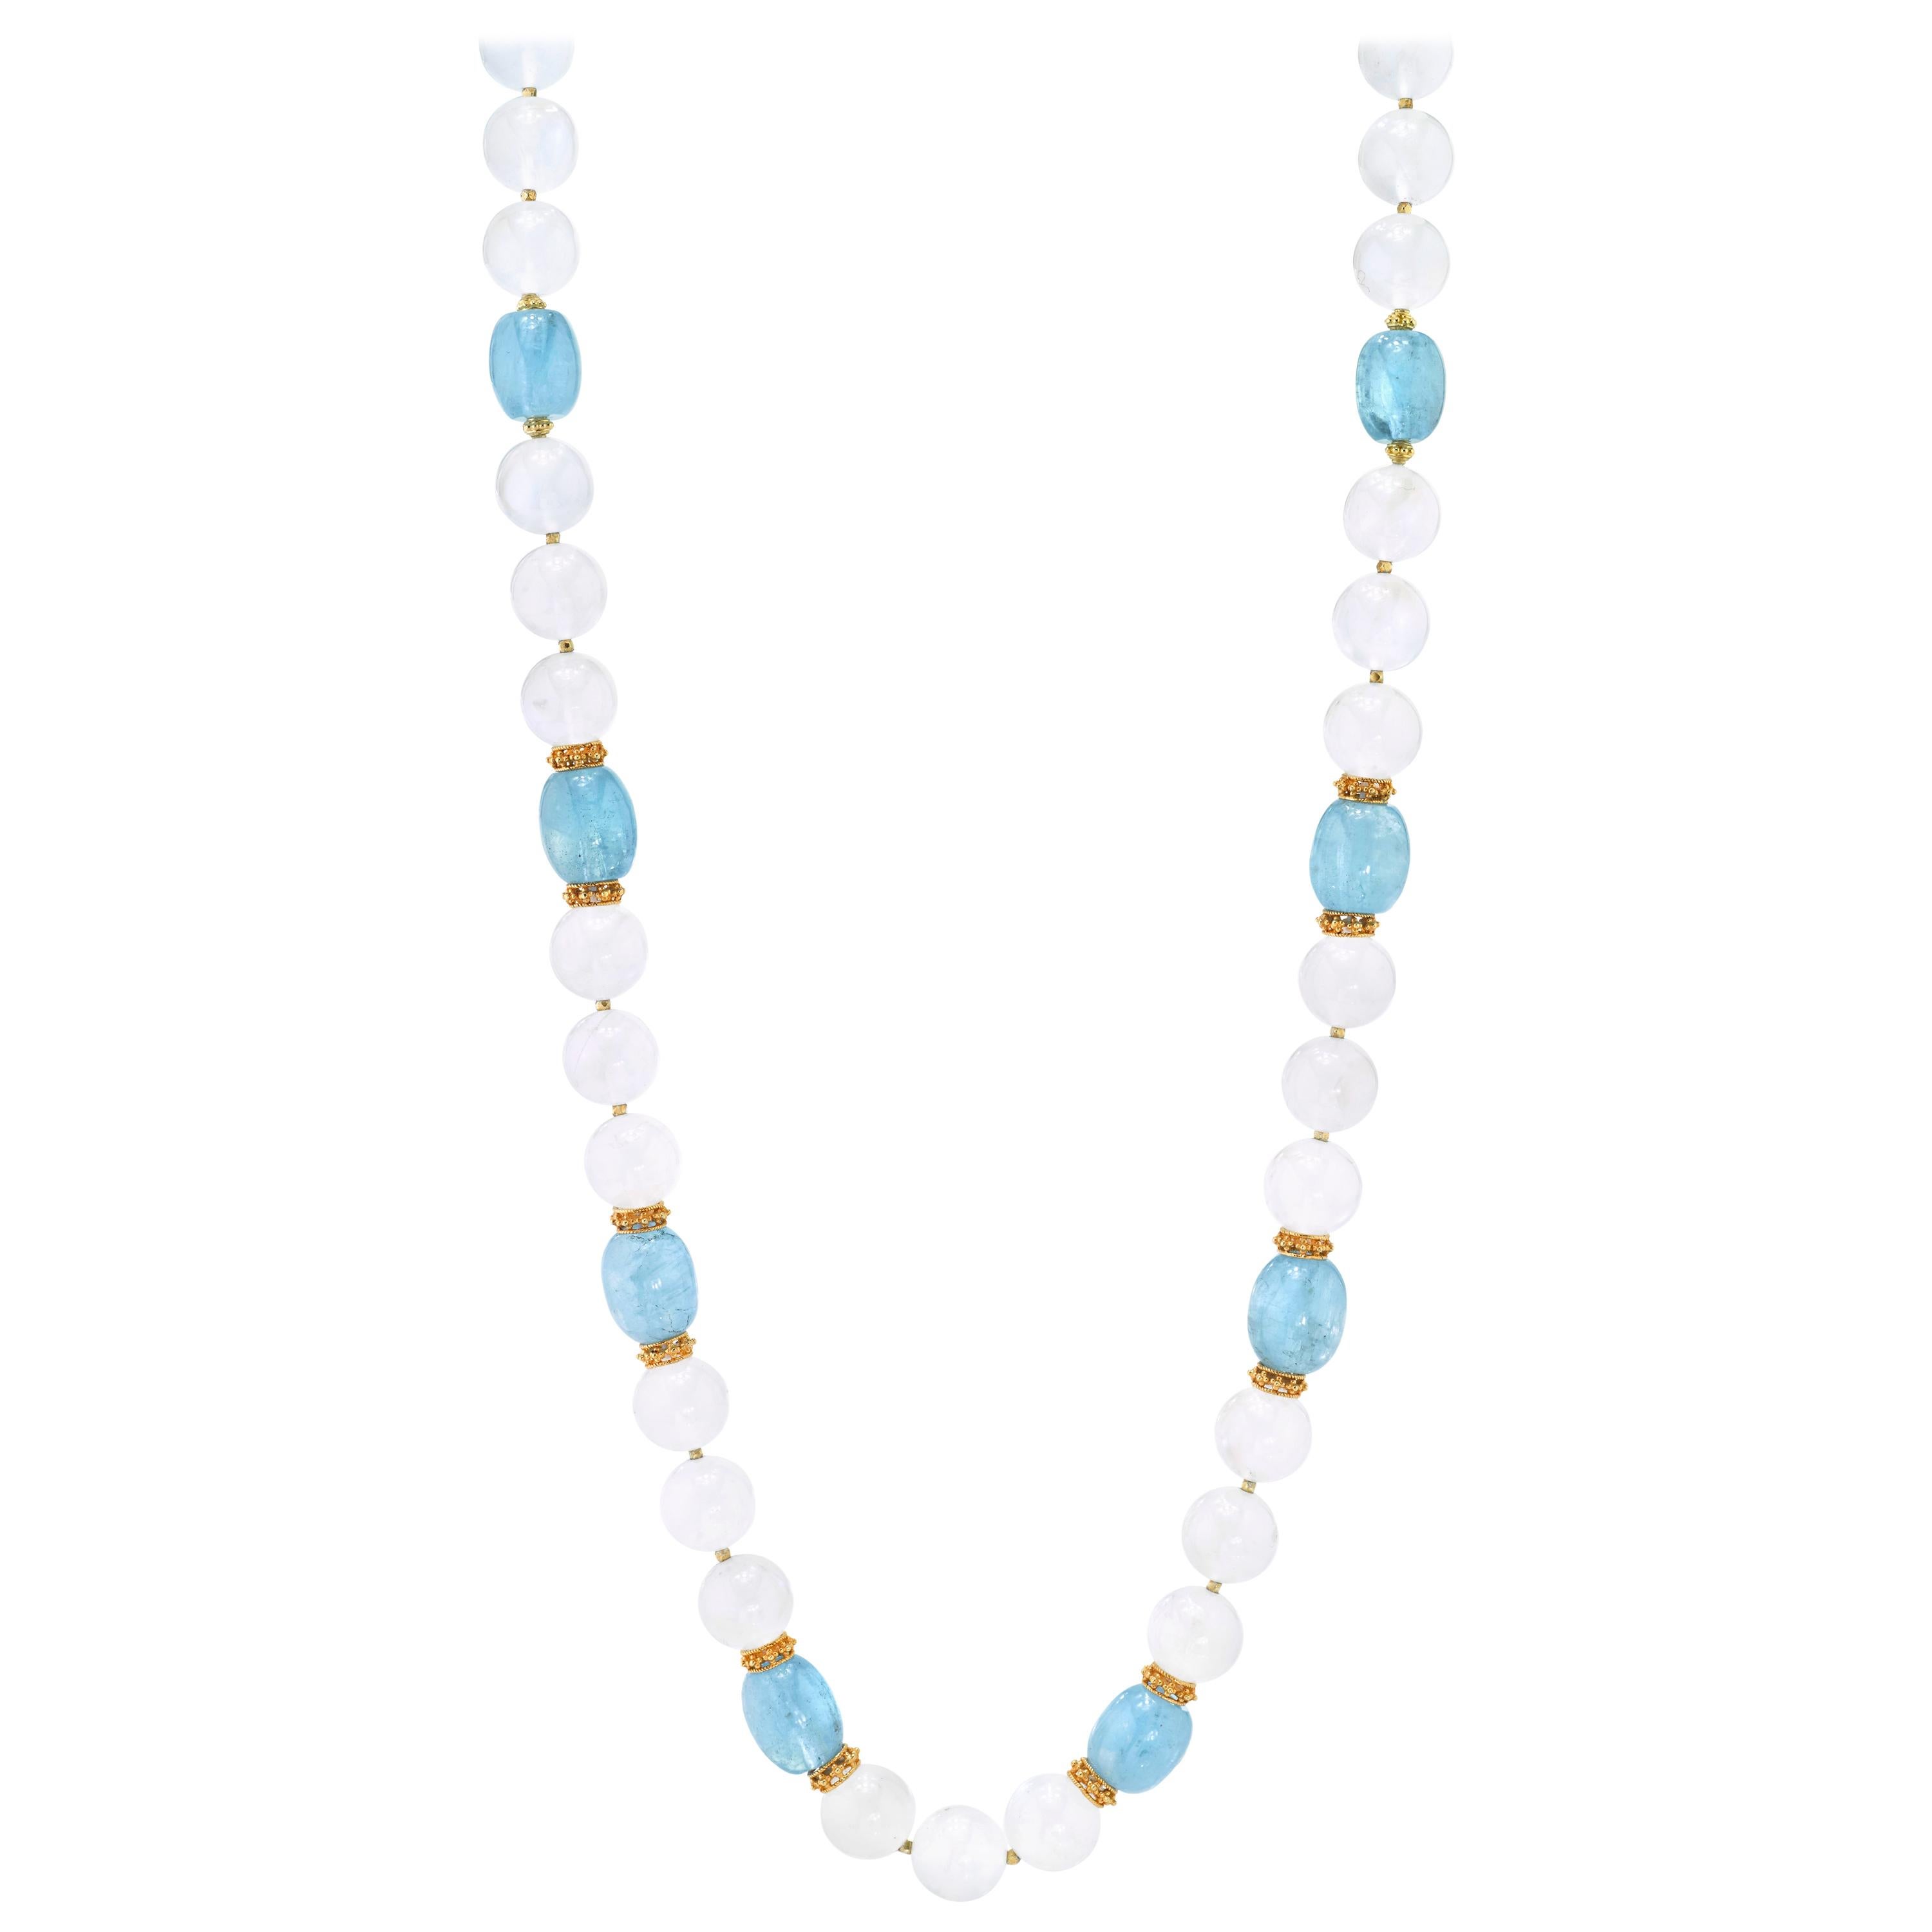 Soft aquamarine blue and dreamy iridescent moonstone gemstone beads come together to create this extraordinarily beautiful necklace! Measuring 24 inches in length, this strand features 10 impressive, barrel-shaped aquamarine beads and 33 exquisite,